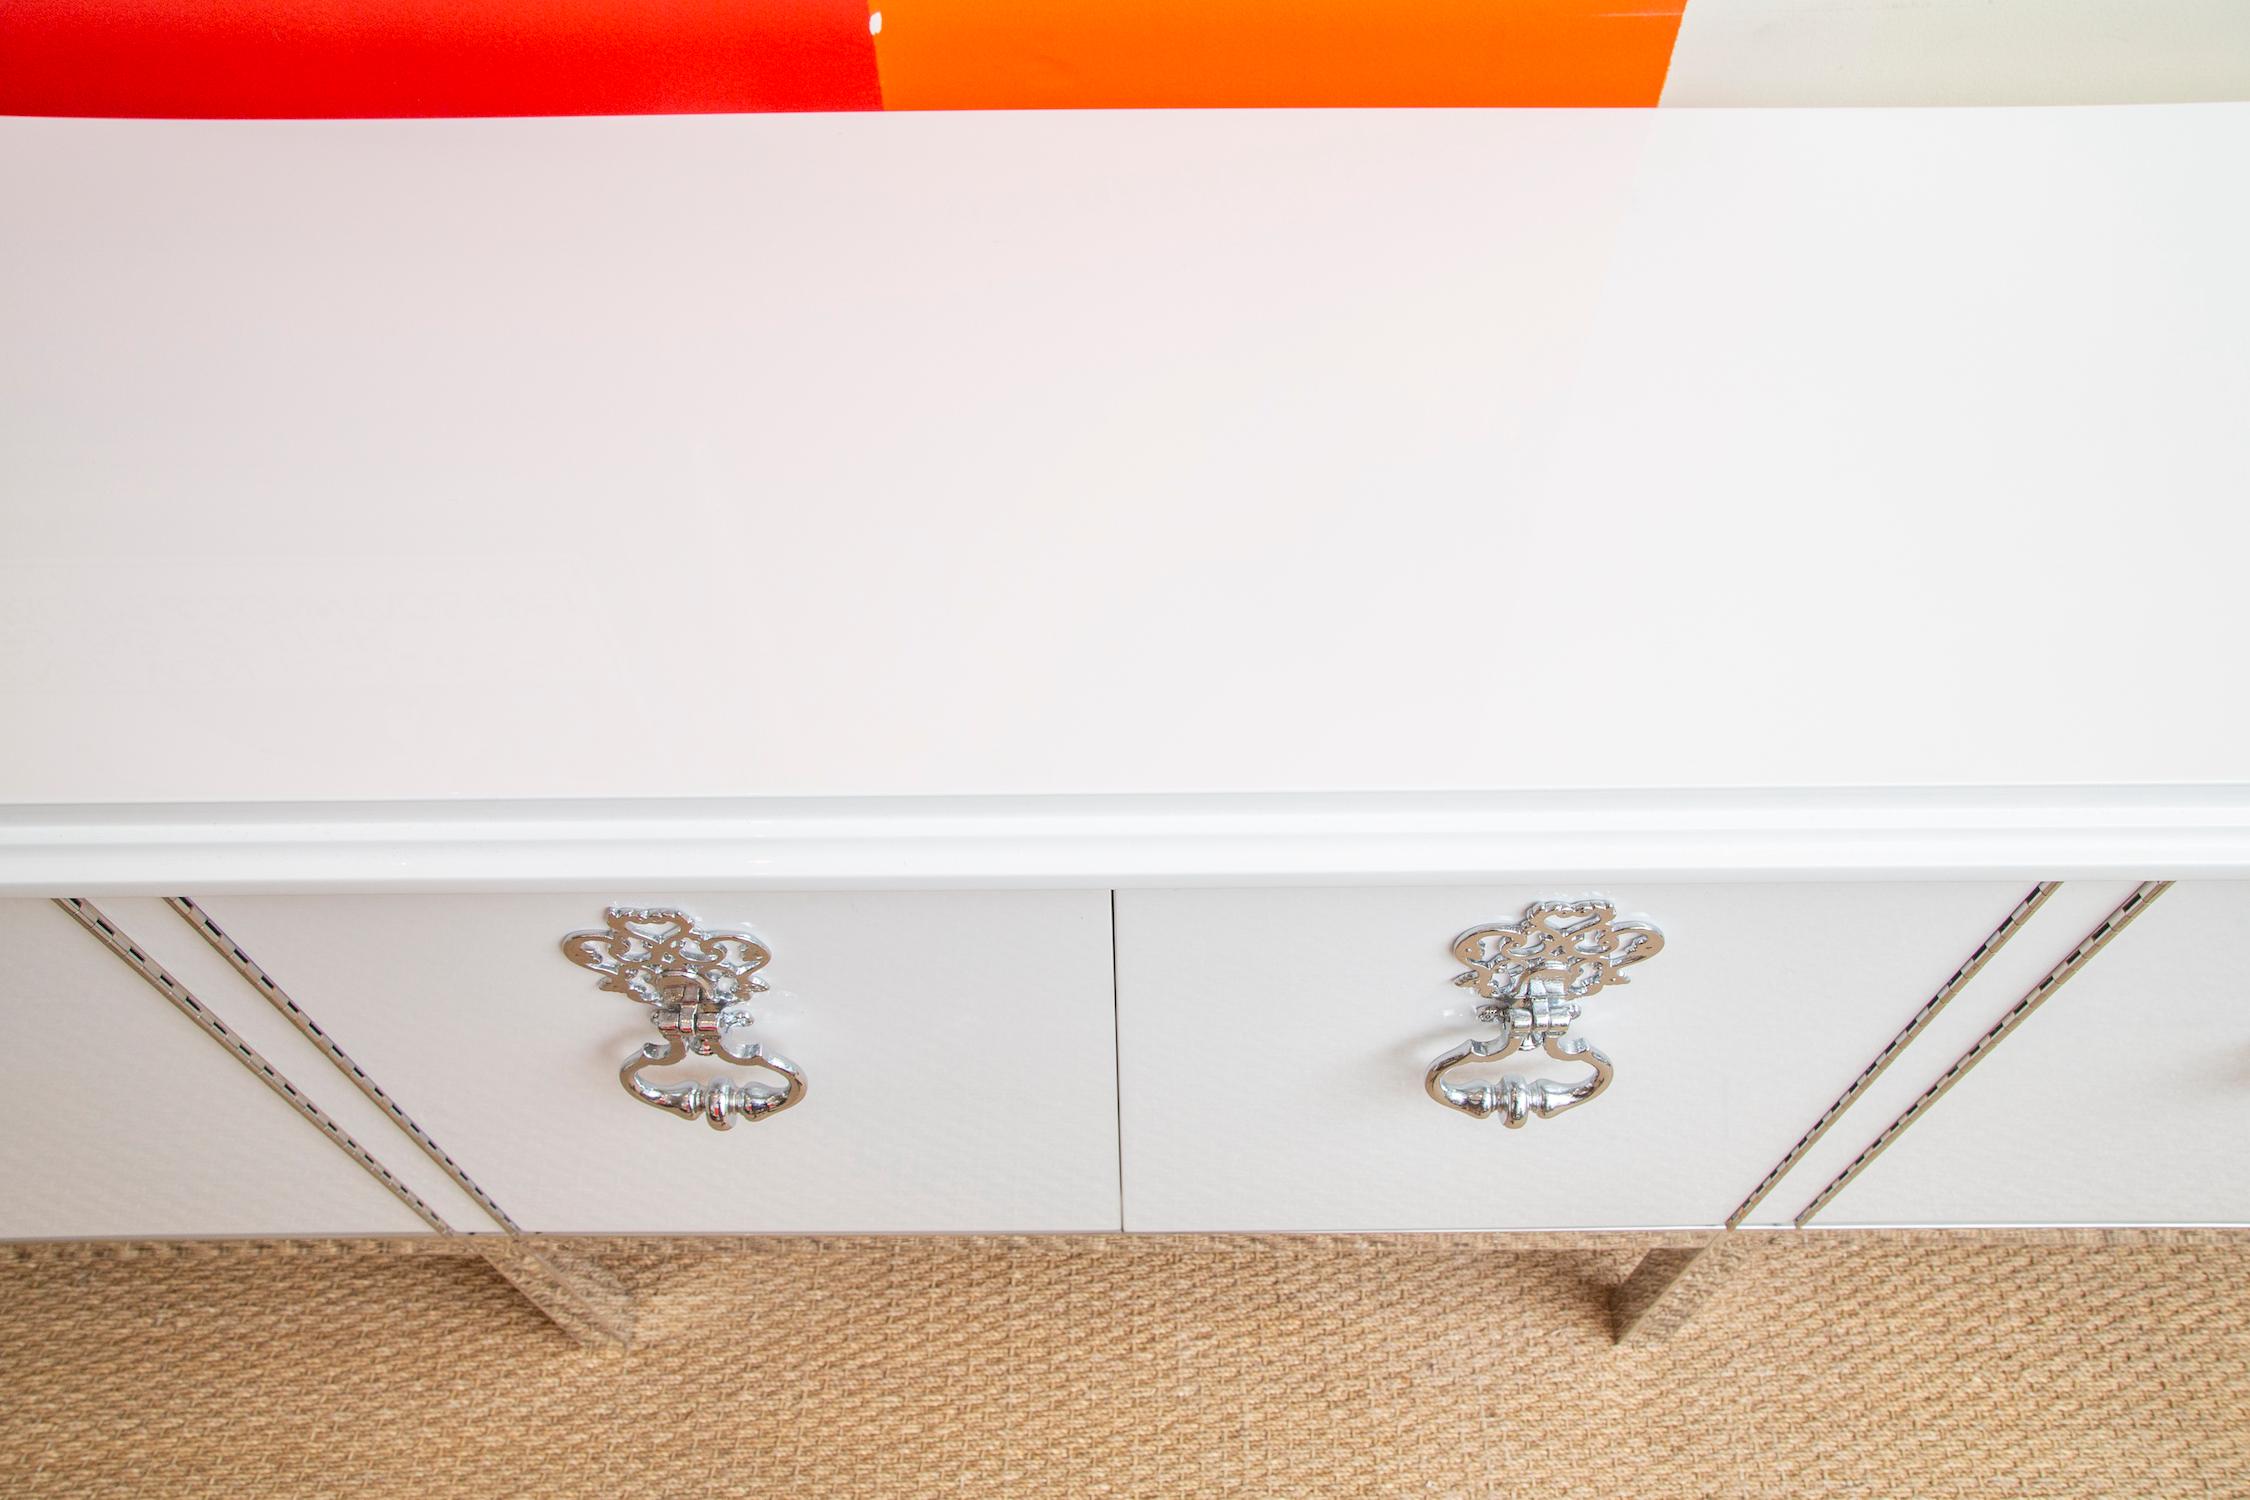 Mastercraft Restored White Lacquered Wood & Chrome Plated Bronze Cabinet Buffet For Sale 12